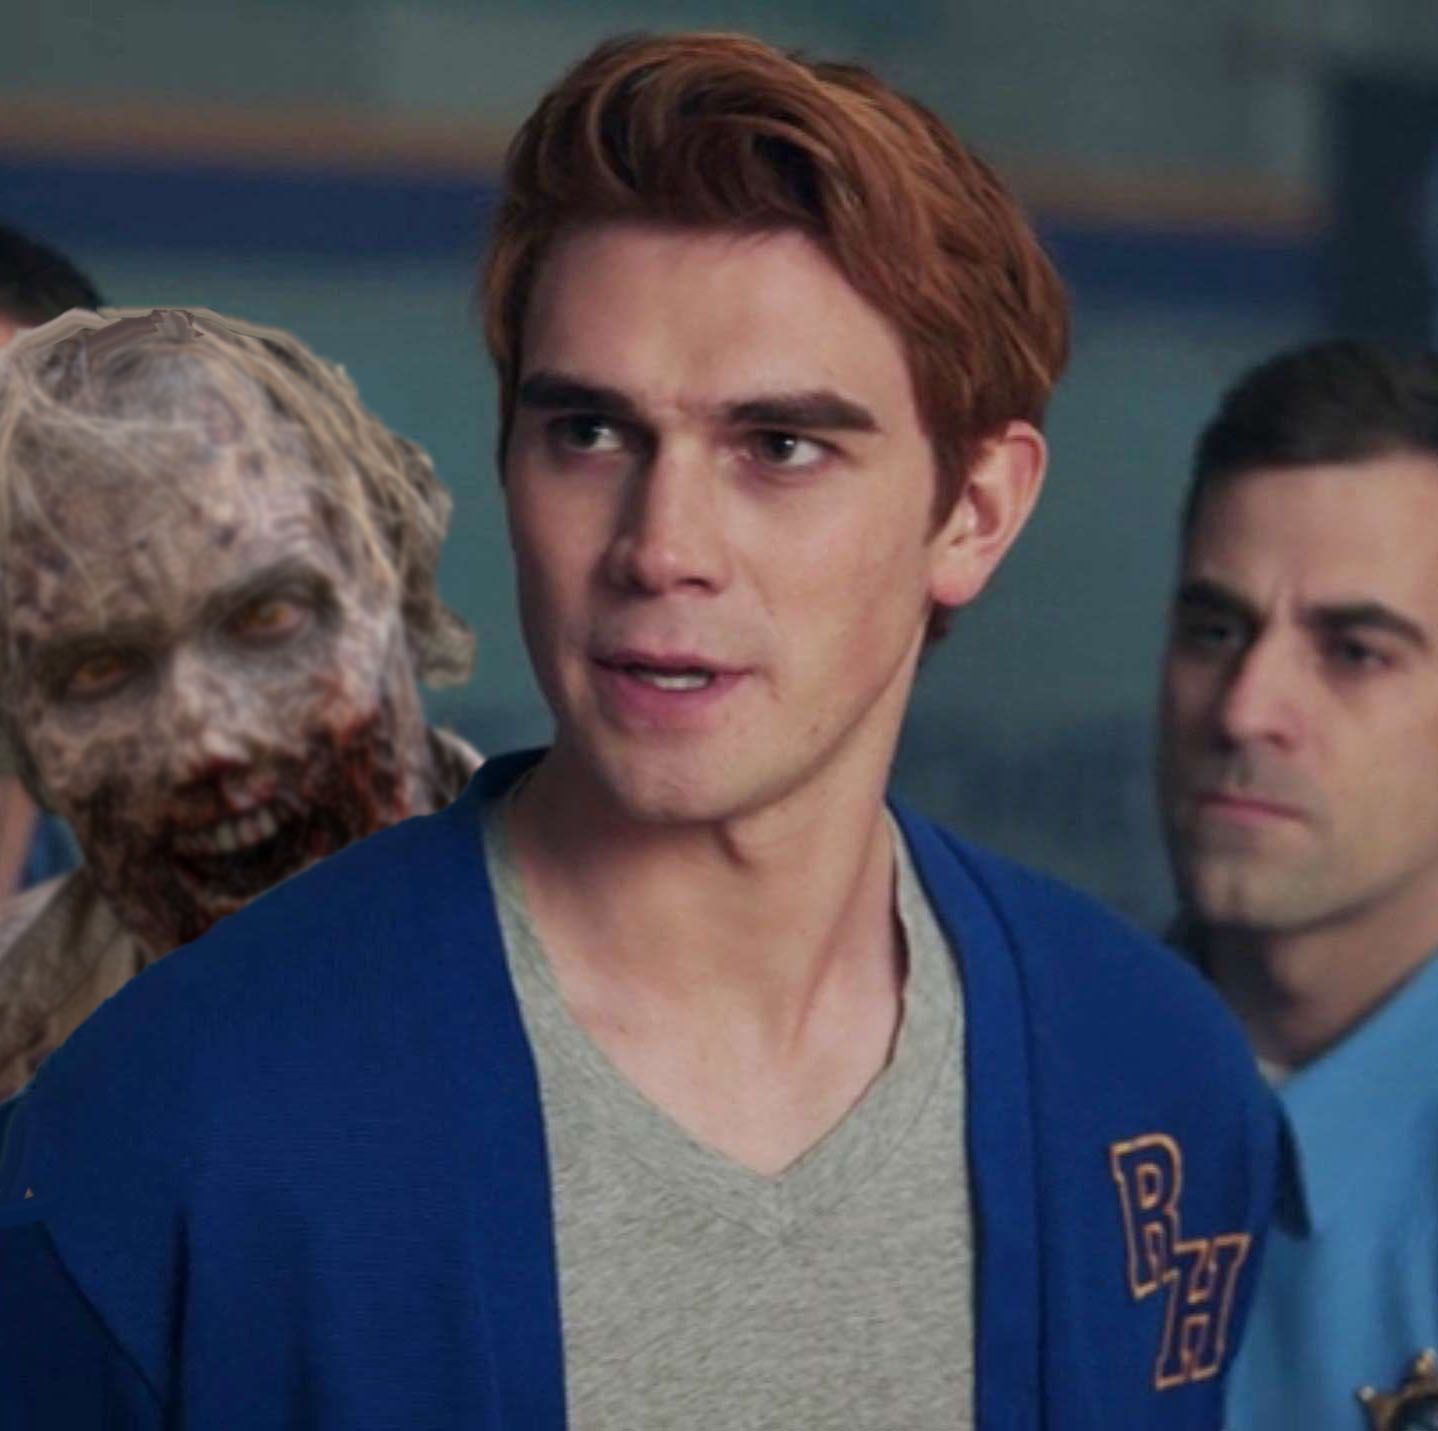 Riverdale Was Nearly About A Zombie Apocalypse